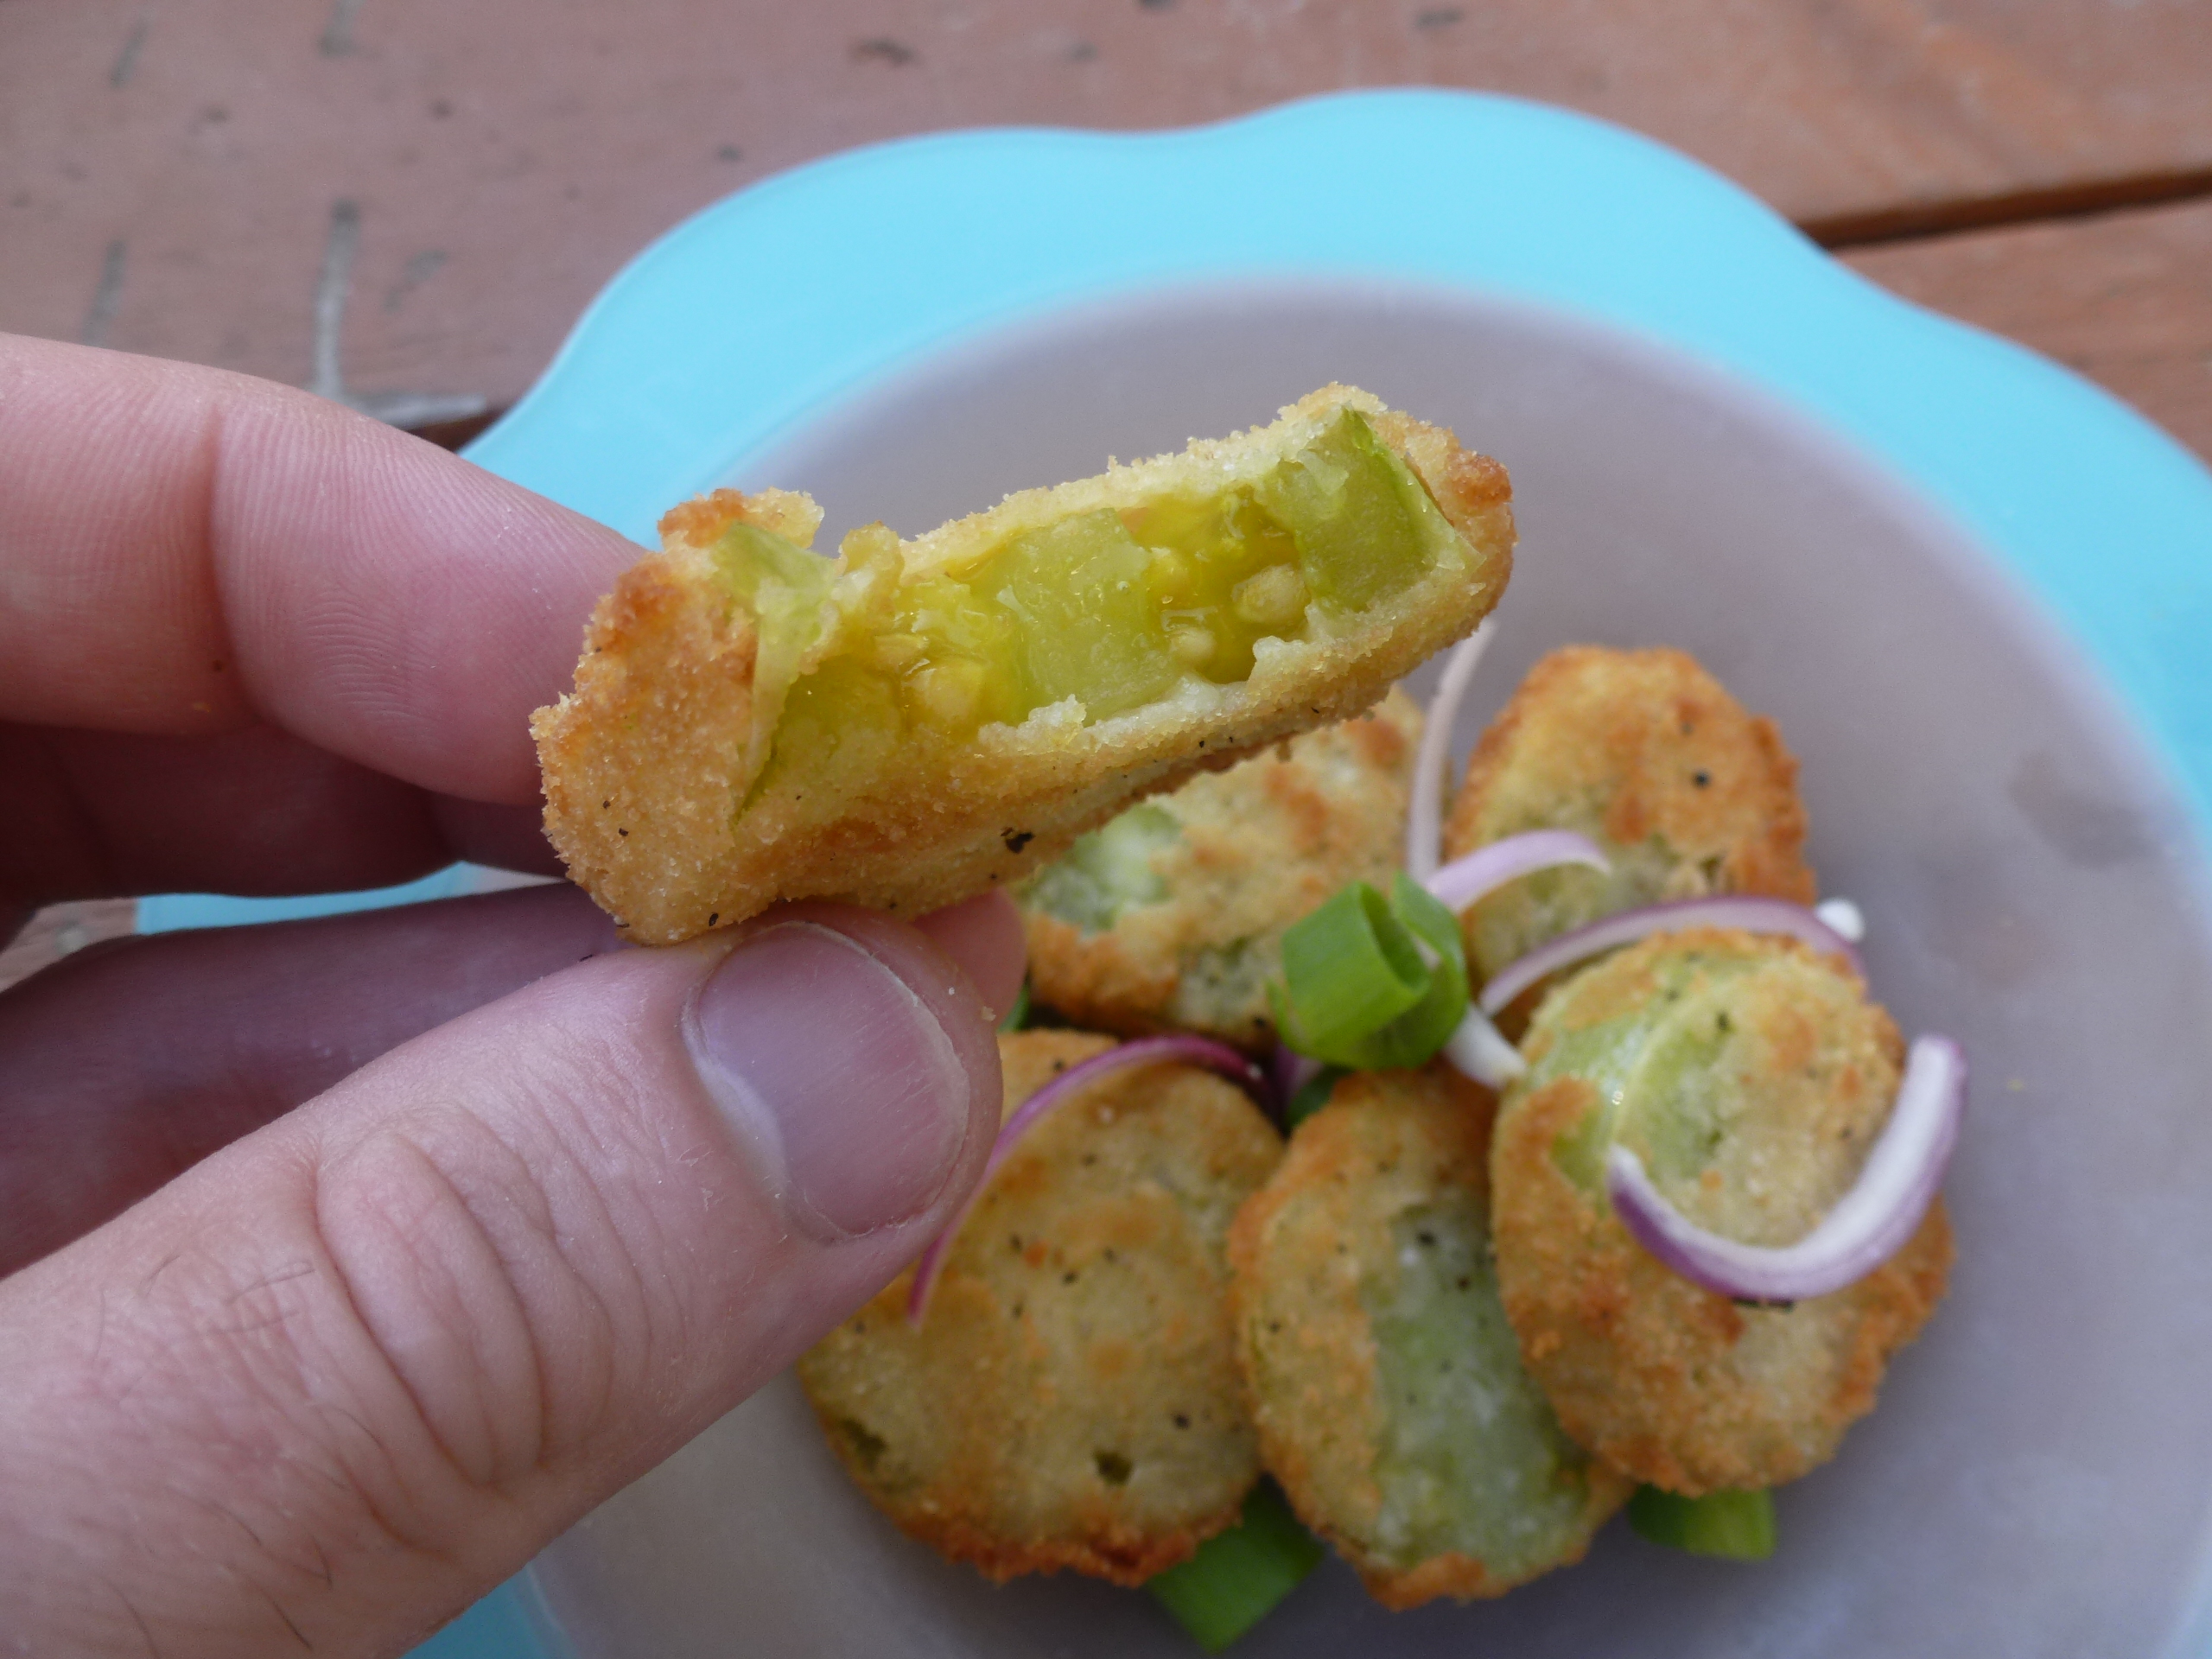 Biting into a fried green tomato